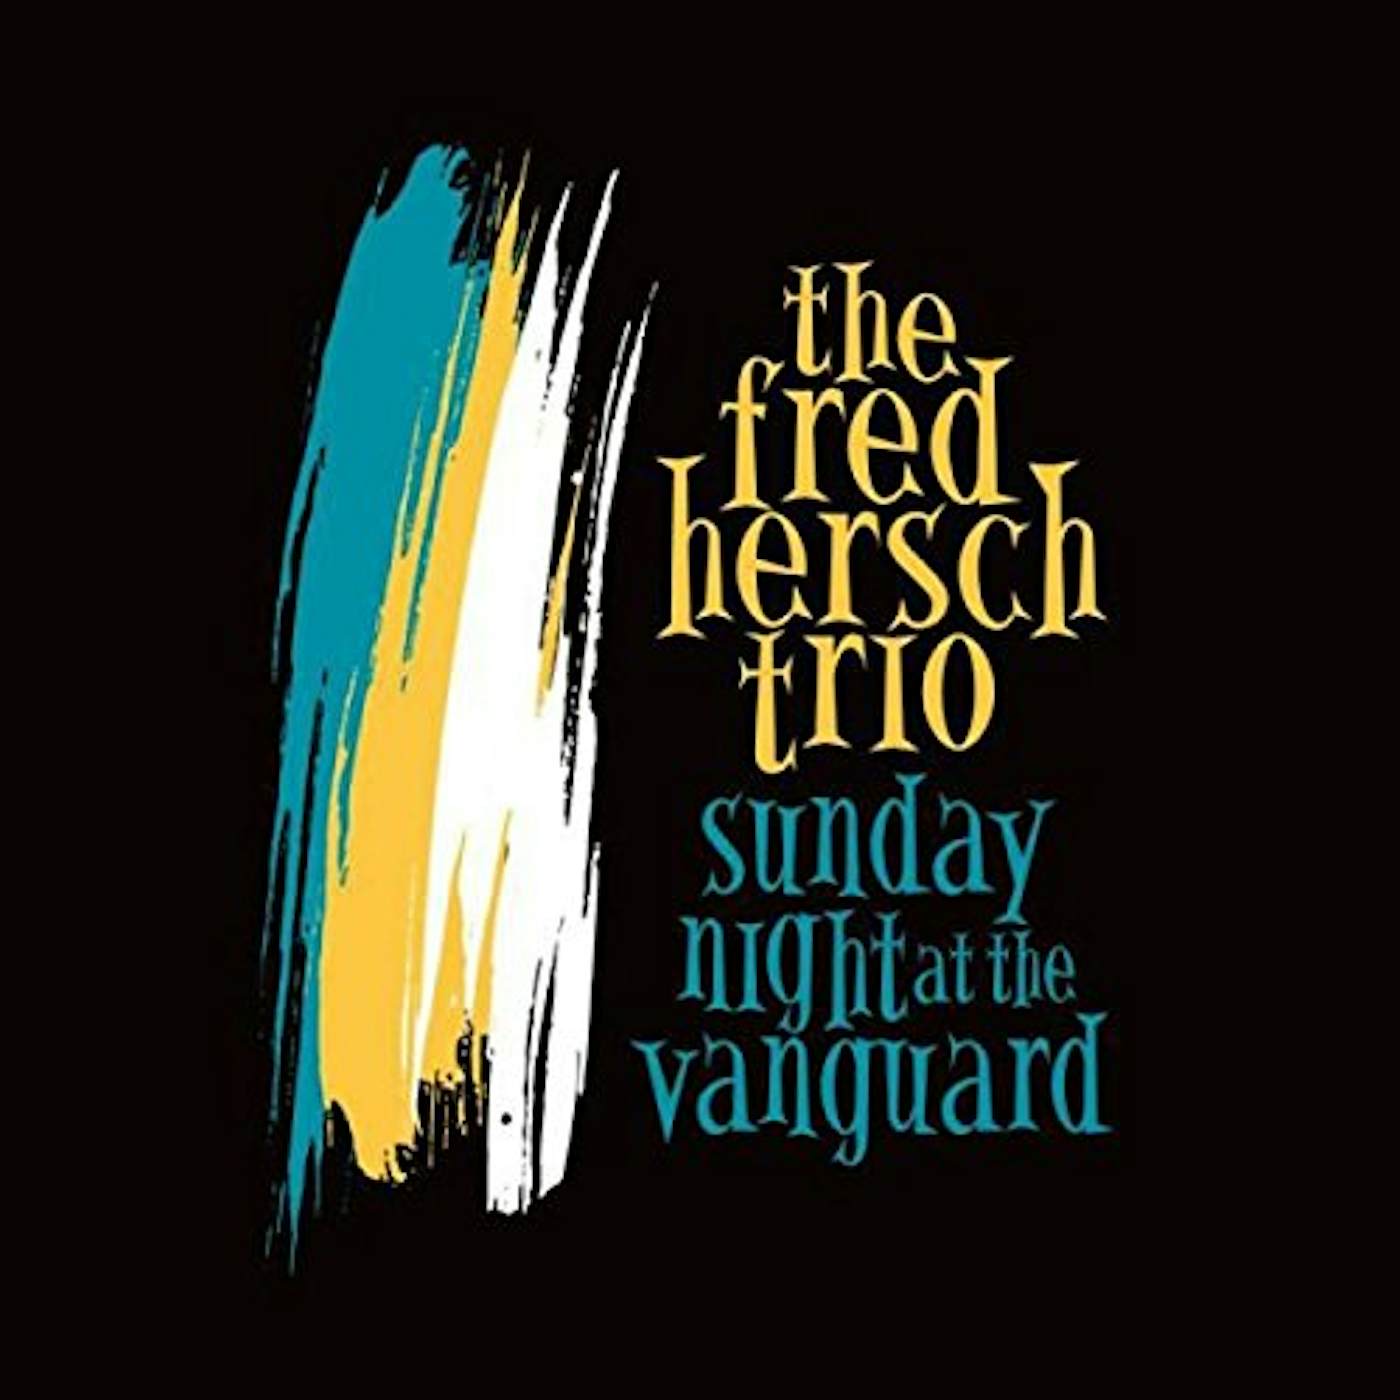 Fred Hersch SUNDAY NIGHT AT THE VANGUARD CD